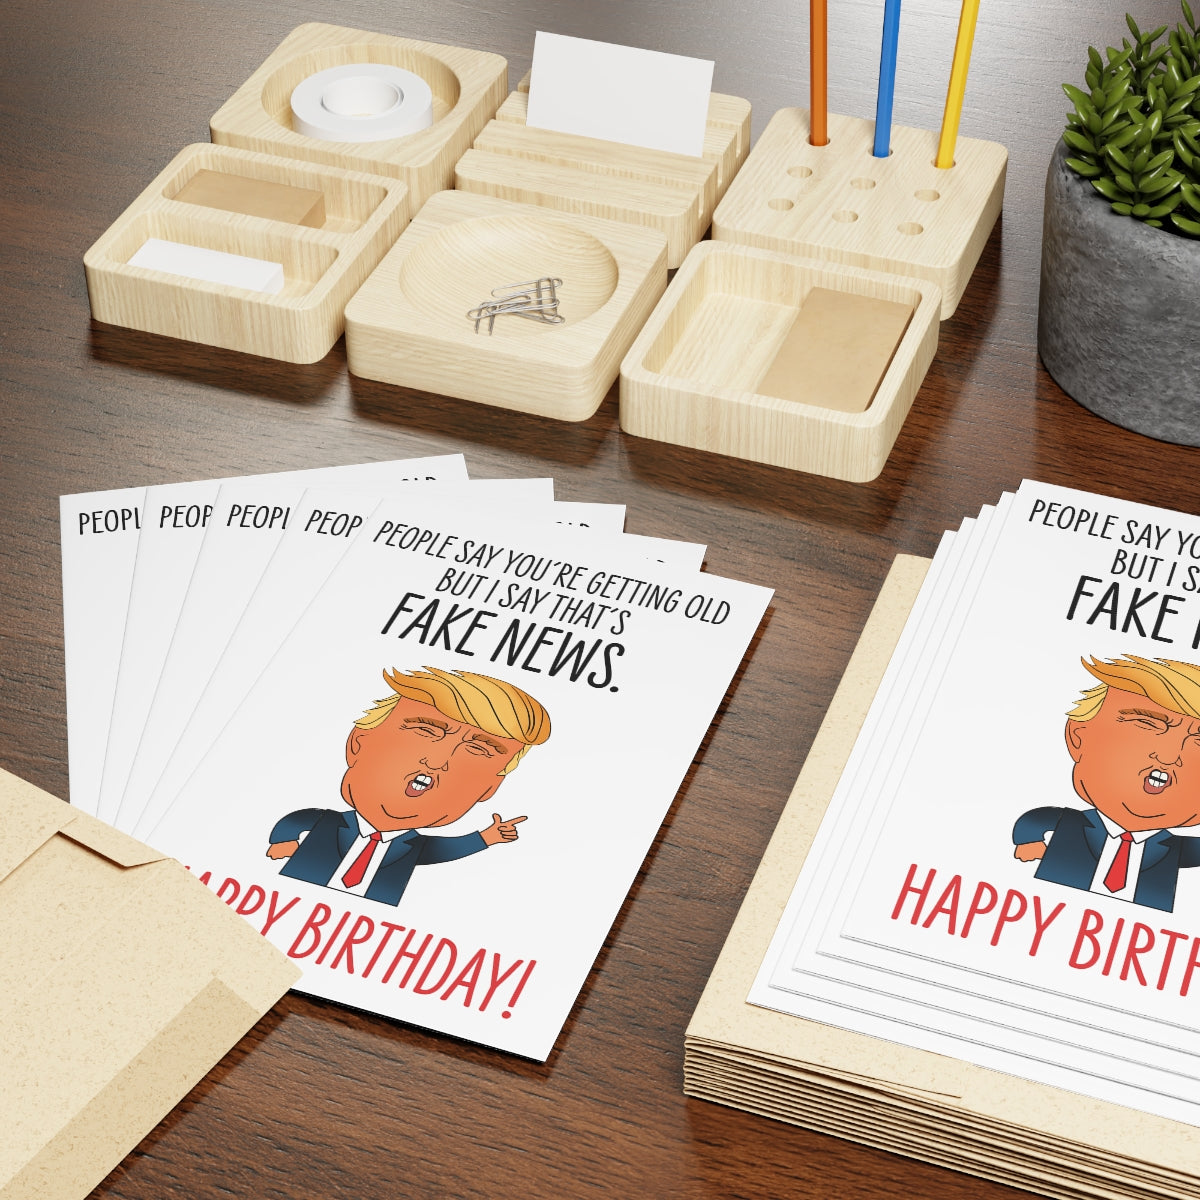 You're Old, Fake News - Birthday Card